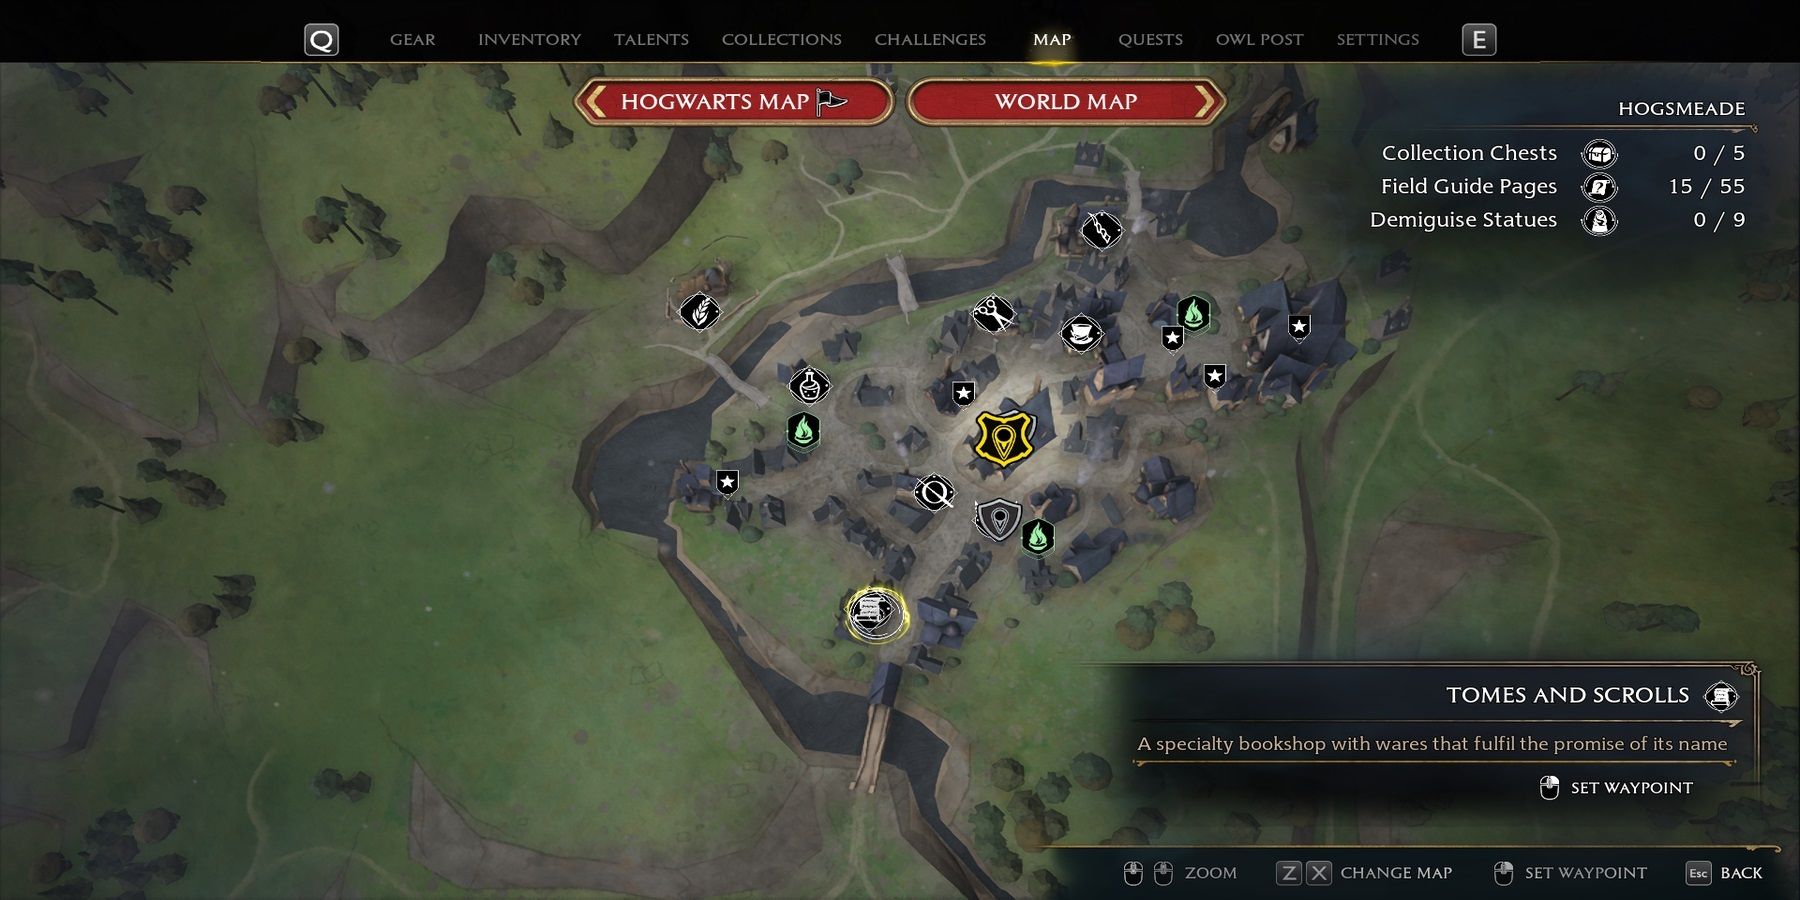 tomes and scrolls location in hogwarts legacy